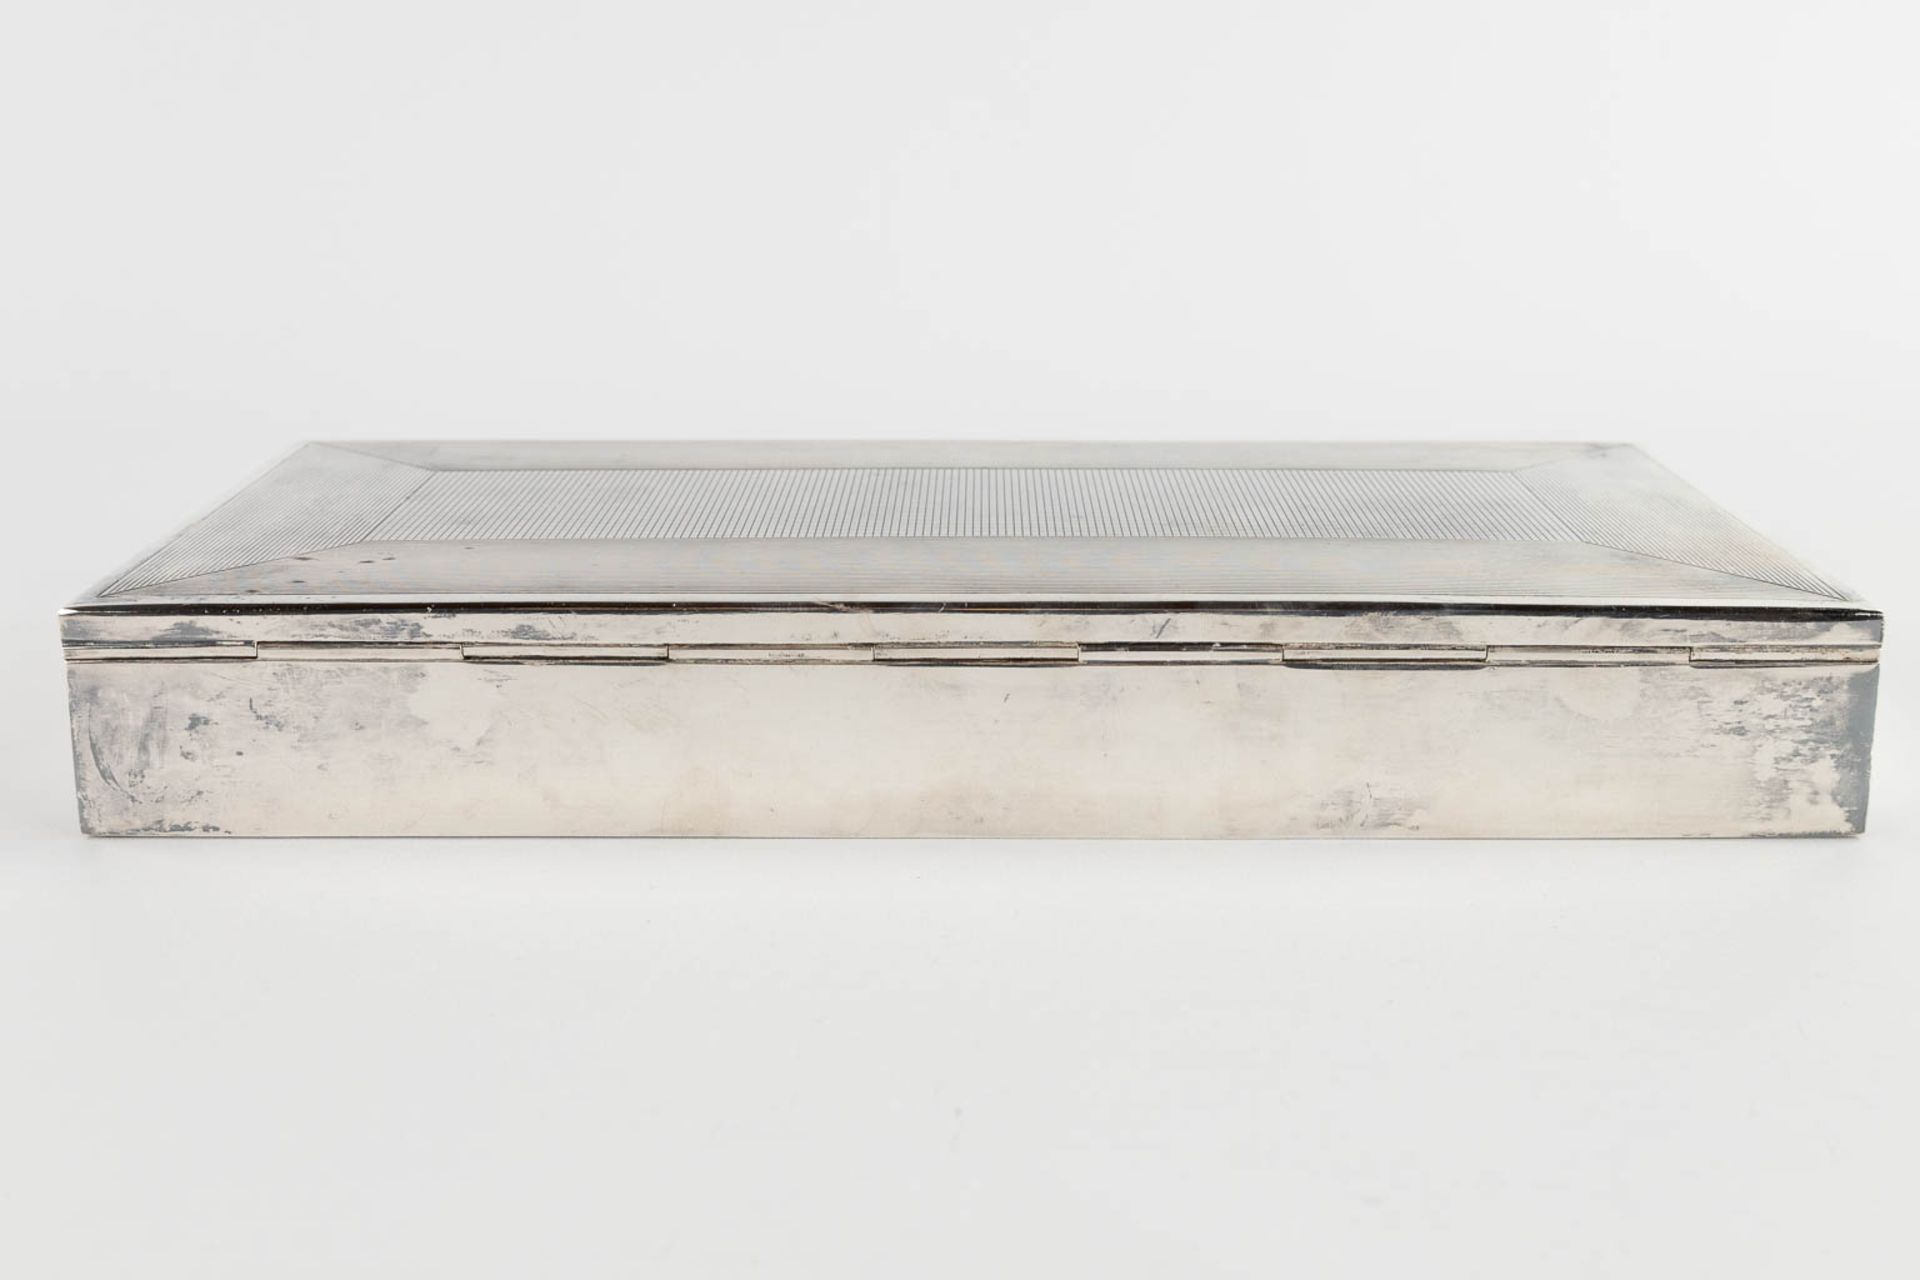 A storage box, silver and wood, Budapest, 835. 20th C. 970g. (D:14 x W:30 x H:4,5 cm) - Image 6 of 12